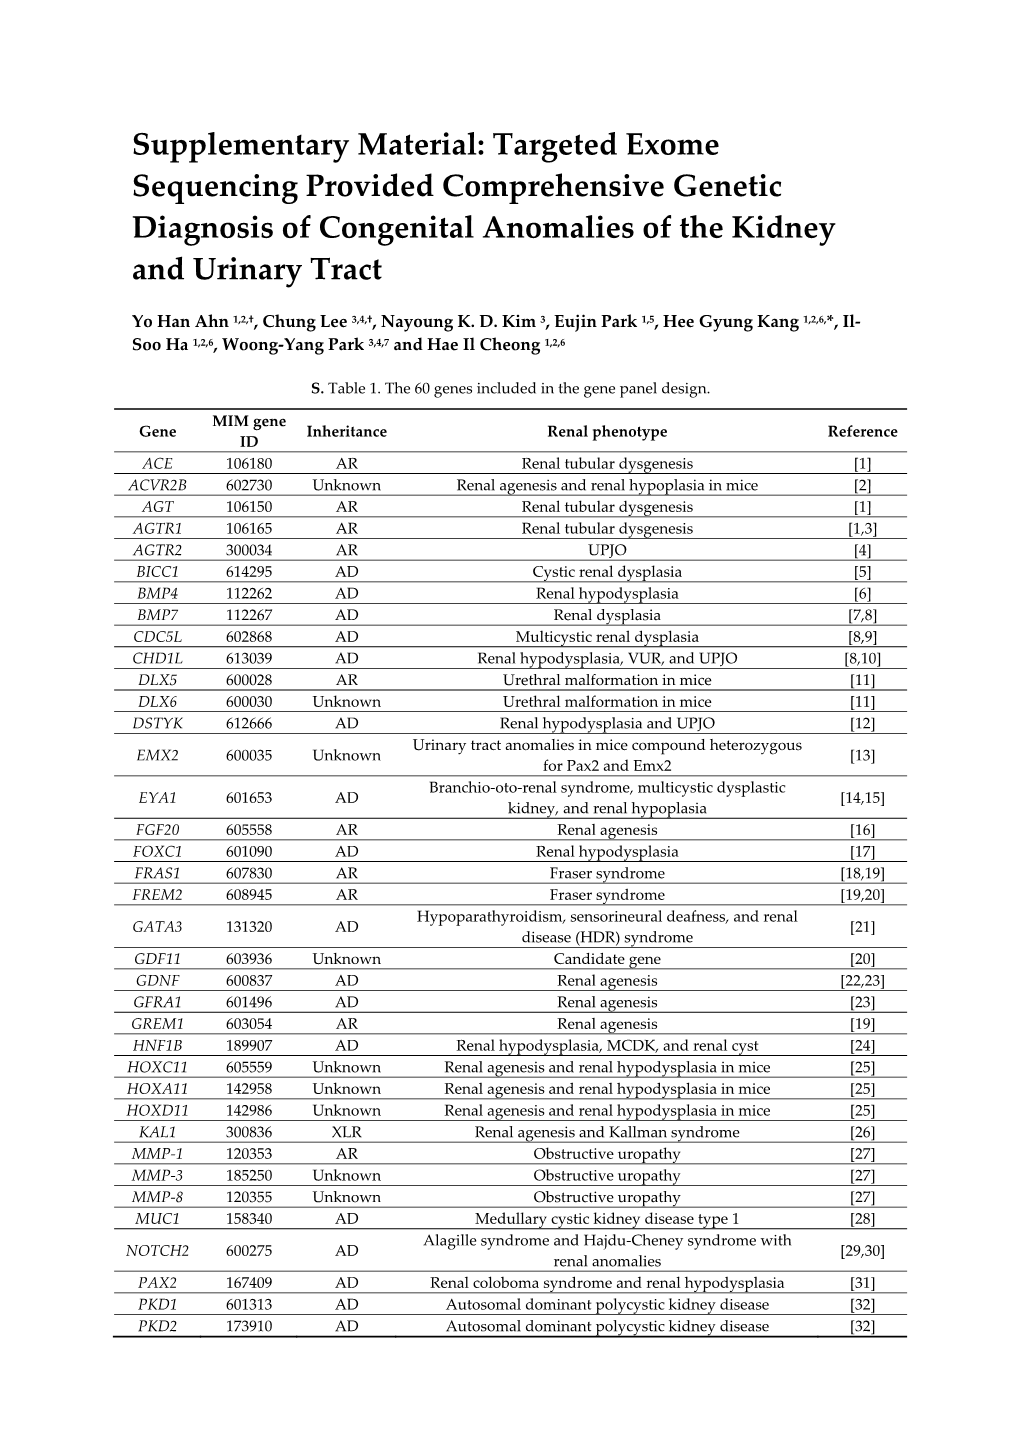 Targeted Exome Sequencing Provided Comprehensive Genetic Diagnosis of Congenital Anomalies of the Kidney and Urinary Tract